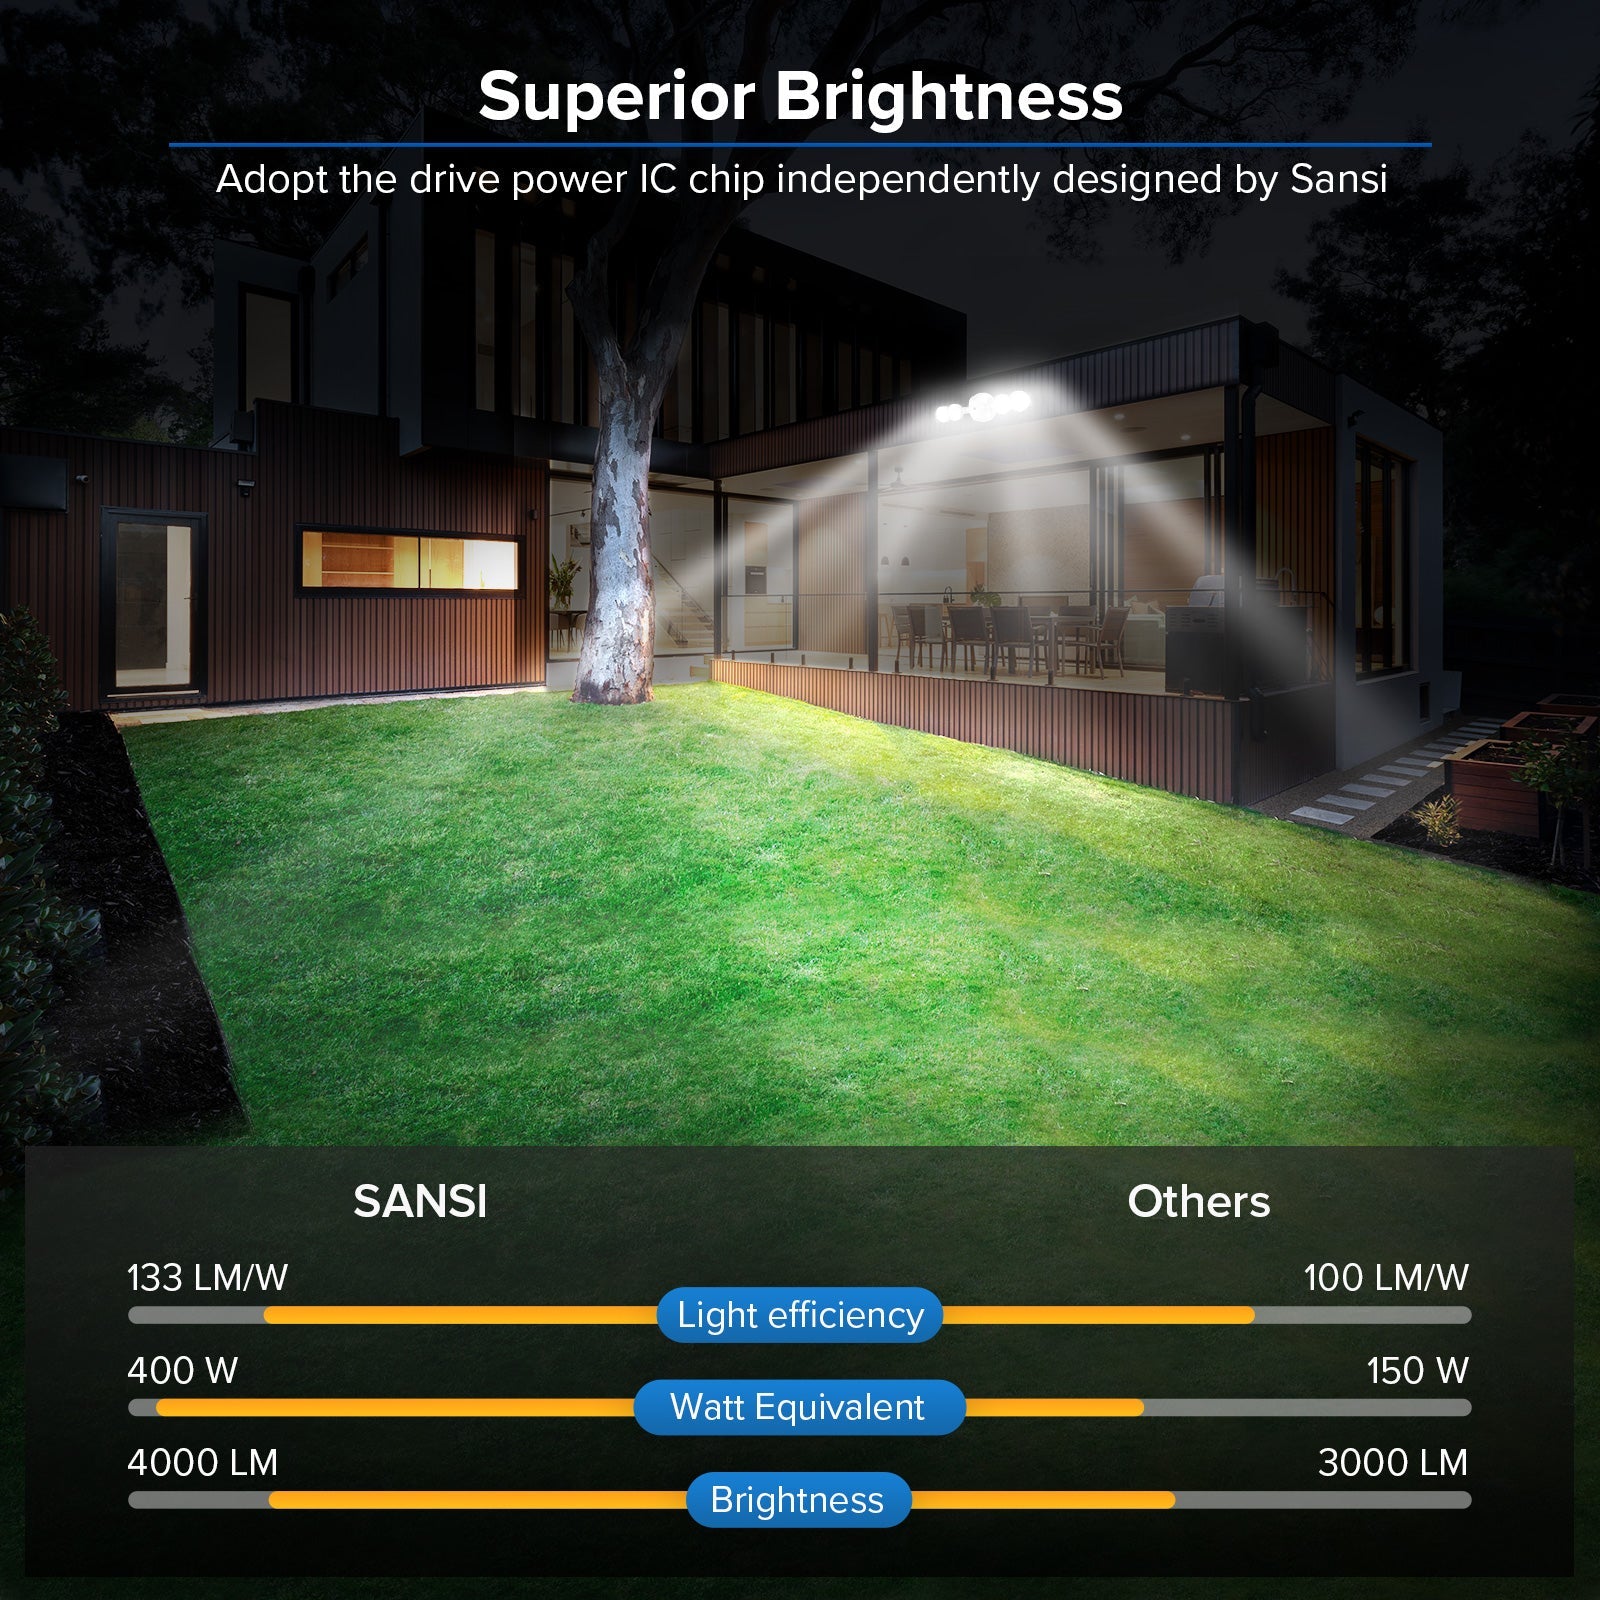 30W LED Security Light (Dusk to Dawn) adopt the drive power IC chip independently designed by SANSI, superior brightness